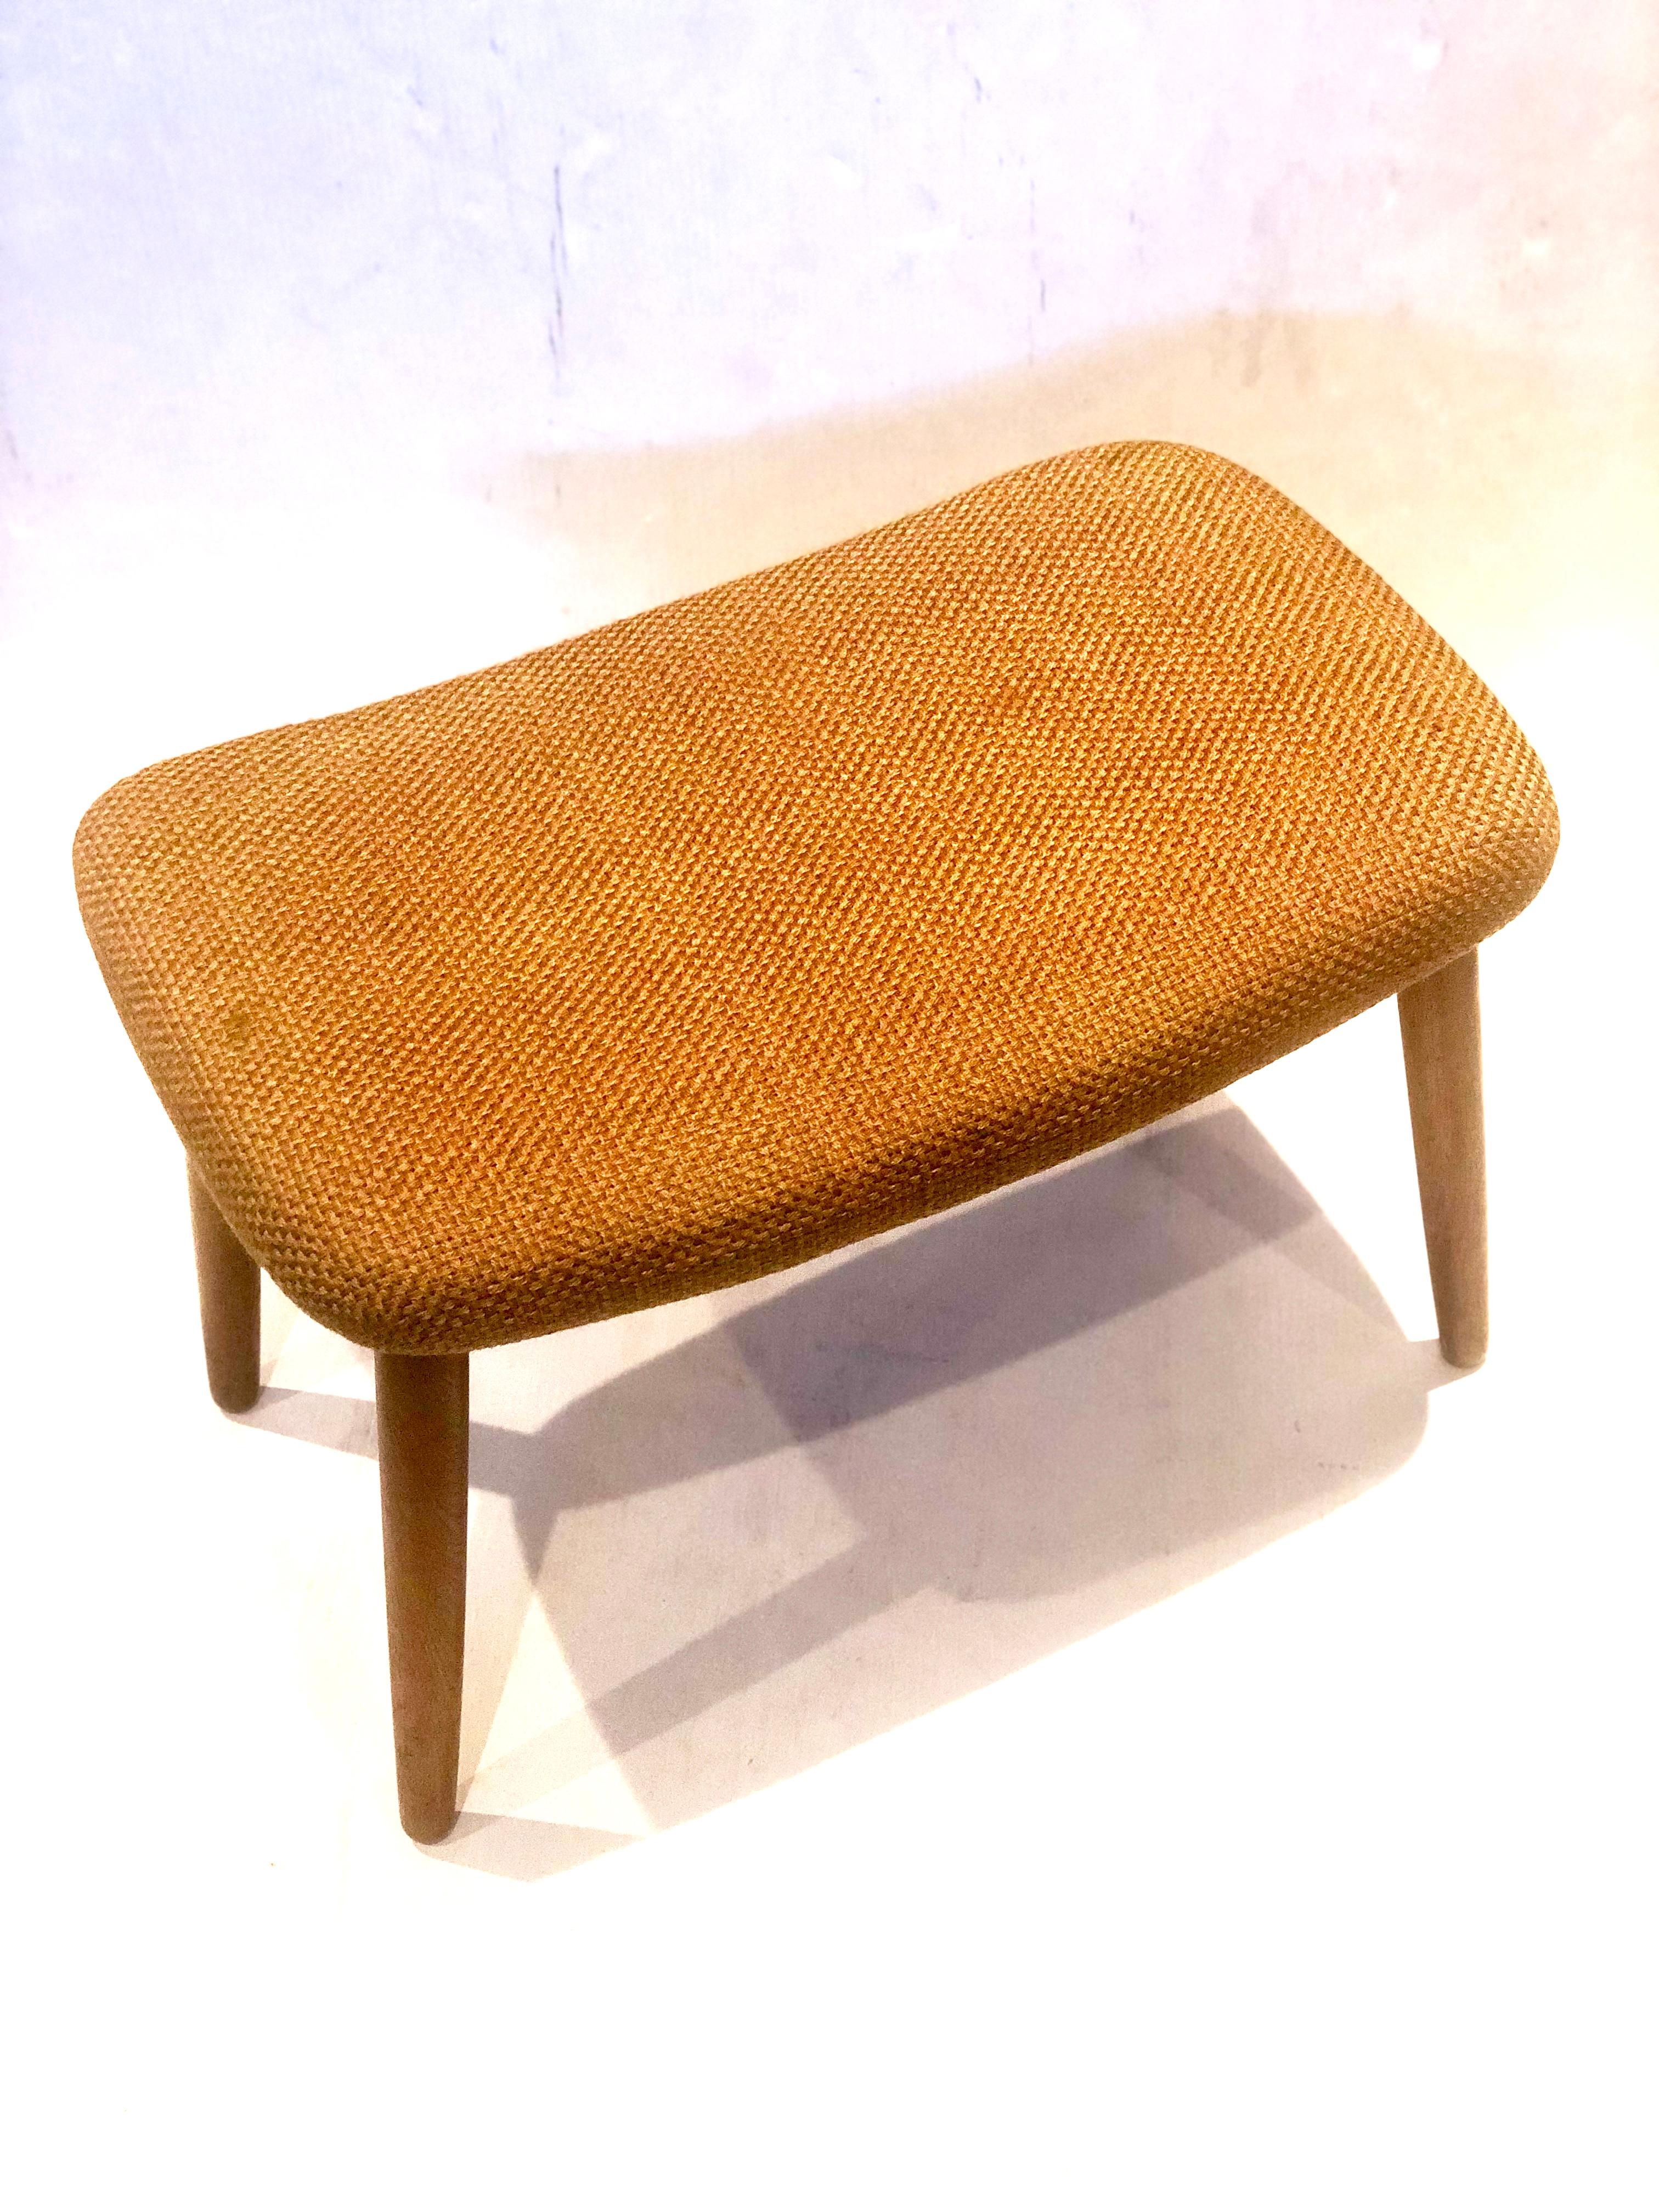 Nicely upholstered Danish stool in its original fabric, solid oak legs, solid and sturdy all original condition with light wear, circa 1950s.